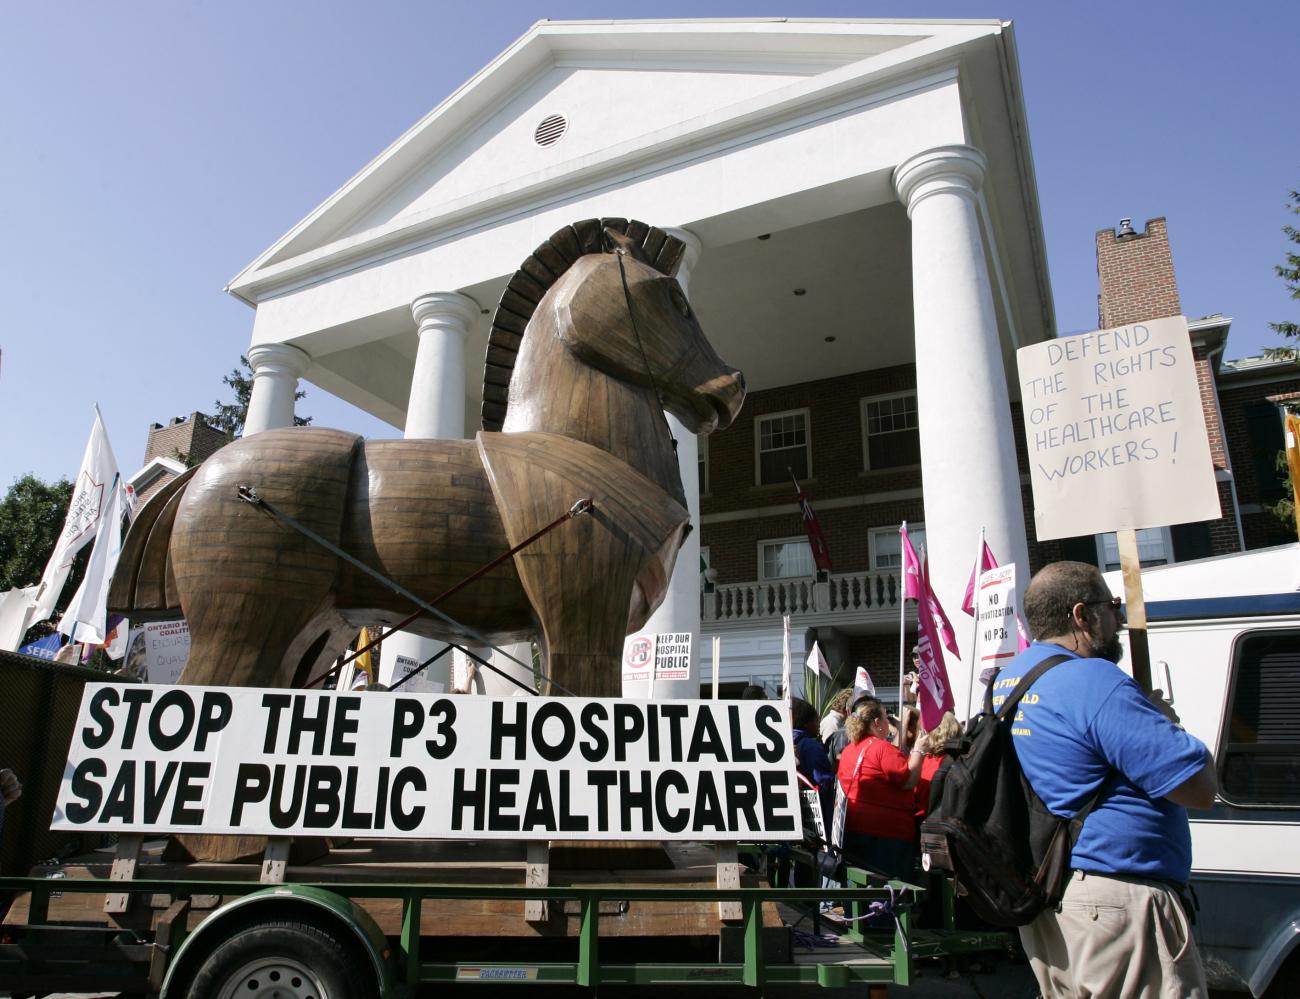 Using a Trojan Horse as a symbol of their cause, health care demonstrators gather outside the site where Provincial Premiers are meeting in Niagara-on-the-Lake, July 28, 2004. The premiers' meeting will highlight on health care prior to their meeting with the Prime Minister in the fall. 